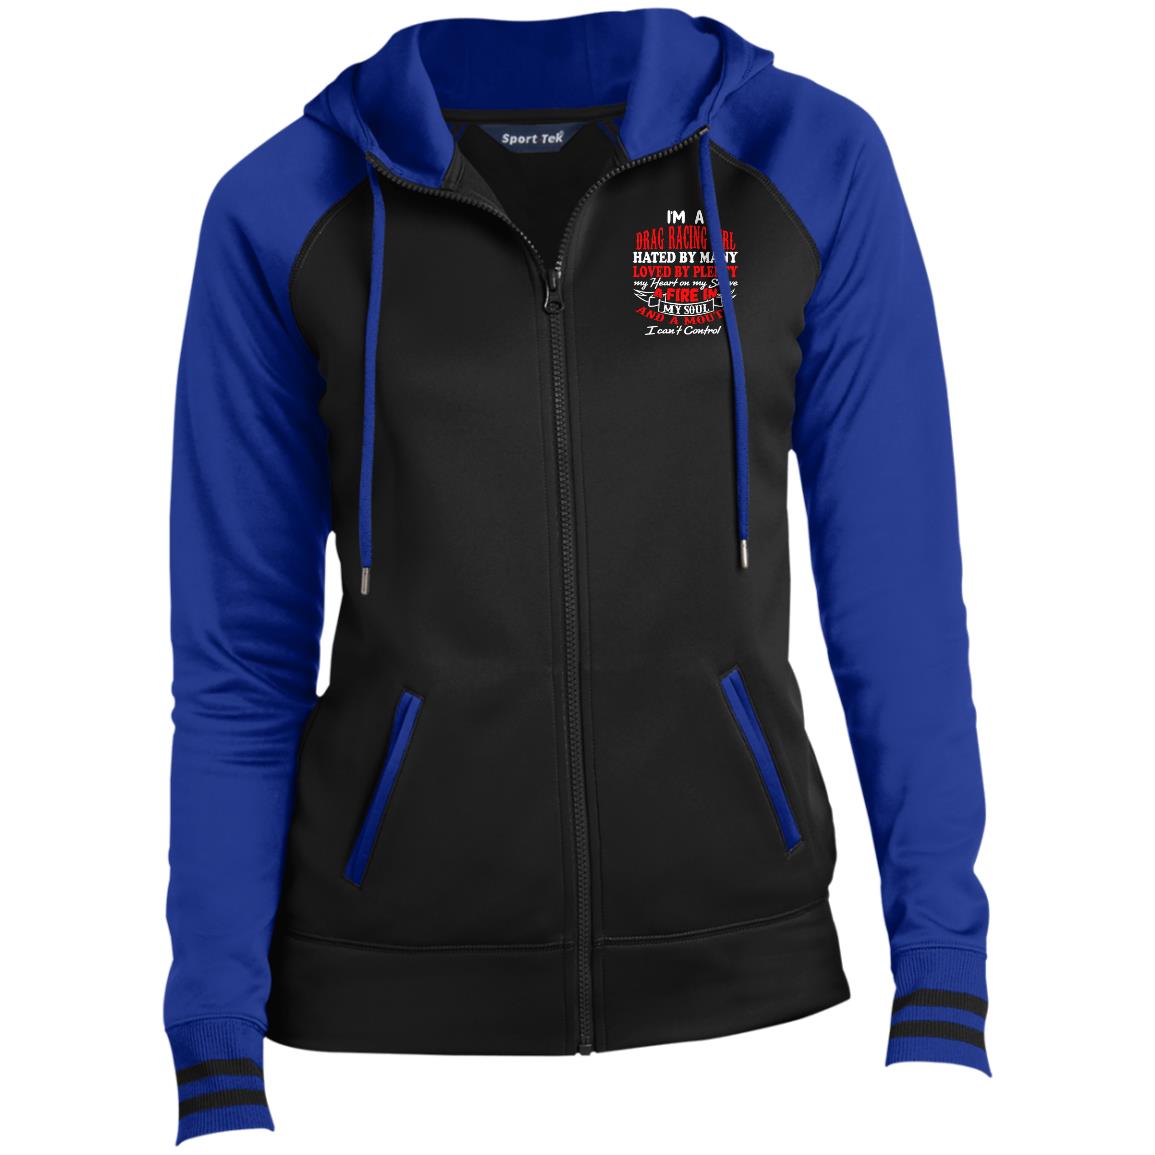 I'm A Drag Racing Girl Hated By Many Loved By Plenty Ladies' Sport-Wick® Full-Zip Hooded Jacket